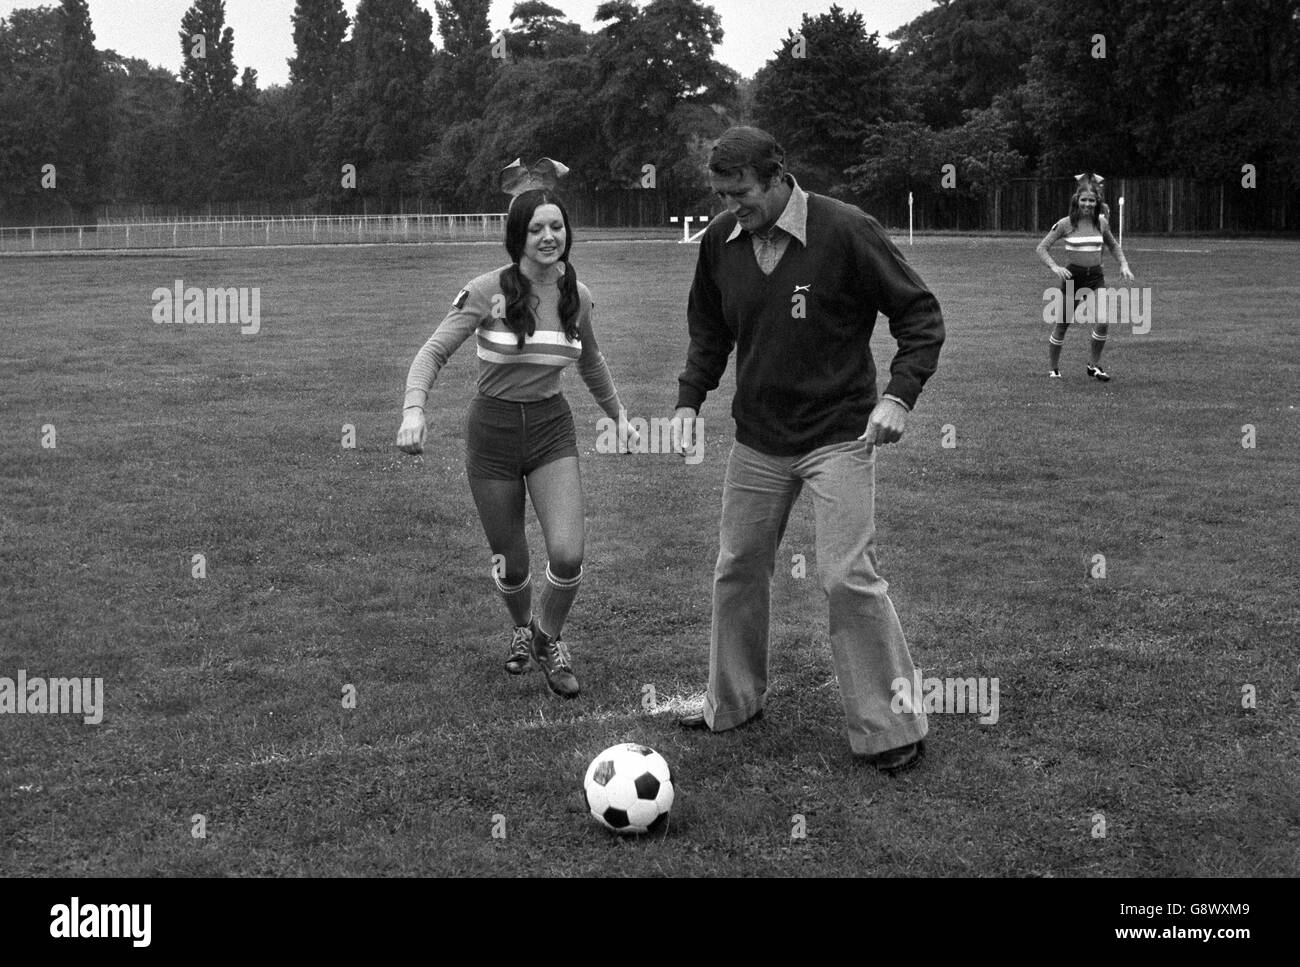 Crystal Palace FC manager Malcolm Allison shows a team of Playboy Club bunnies some skills before a match against a team of 'Apes' from the film Battle for the Planet of the Apes. The match was in aid of the World Wildlife Fund. Stock Photo